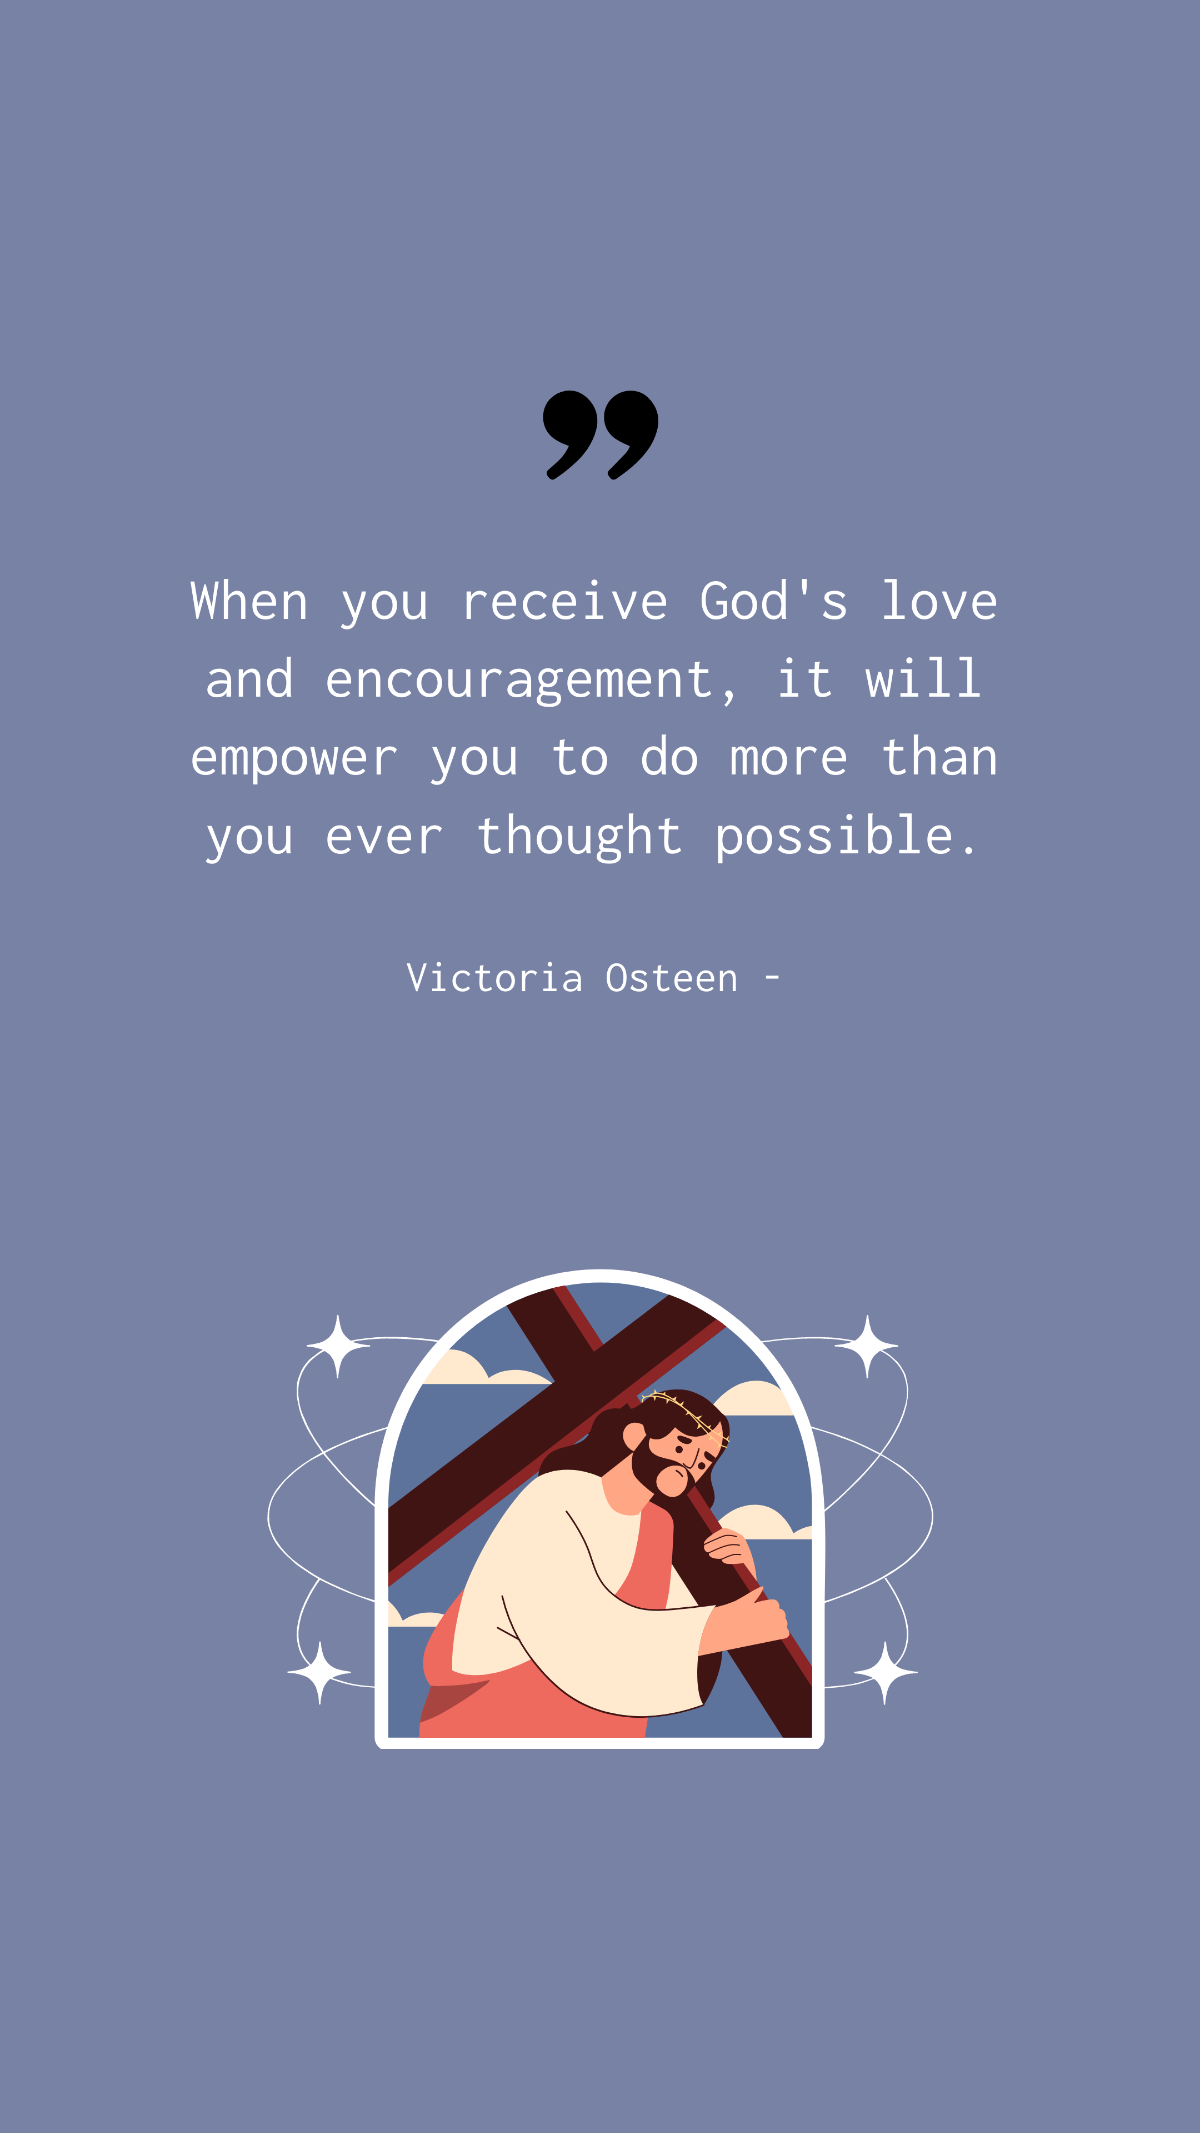 Free Victoria Osteen - When you receive God's love and encouragement, it will empower you to do more than you ever thought possible. Template